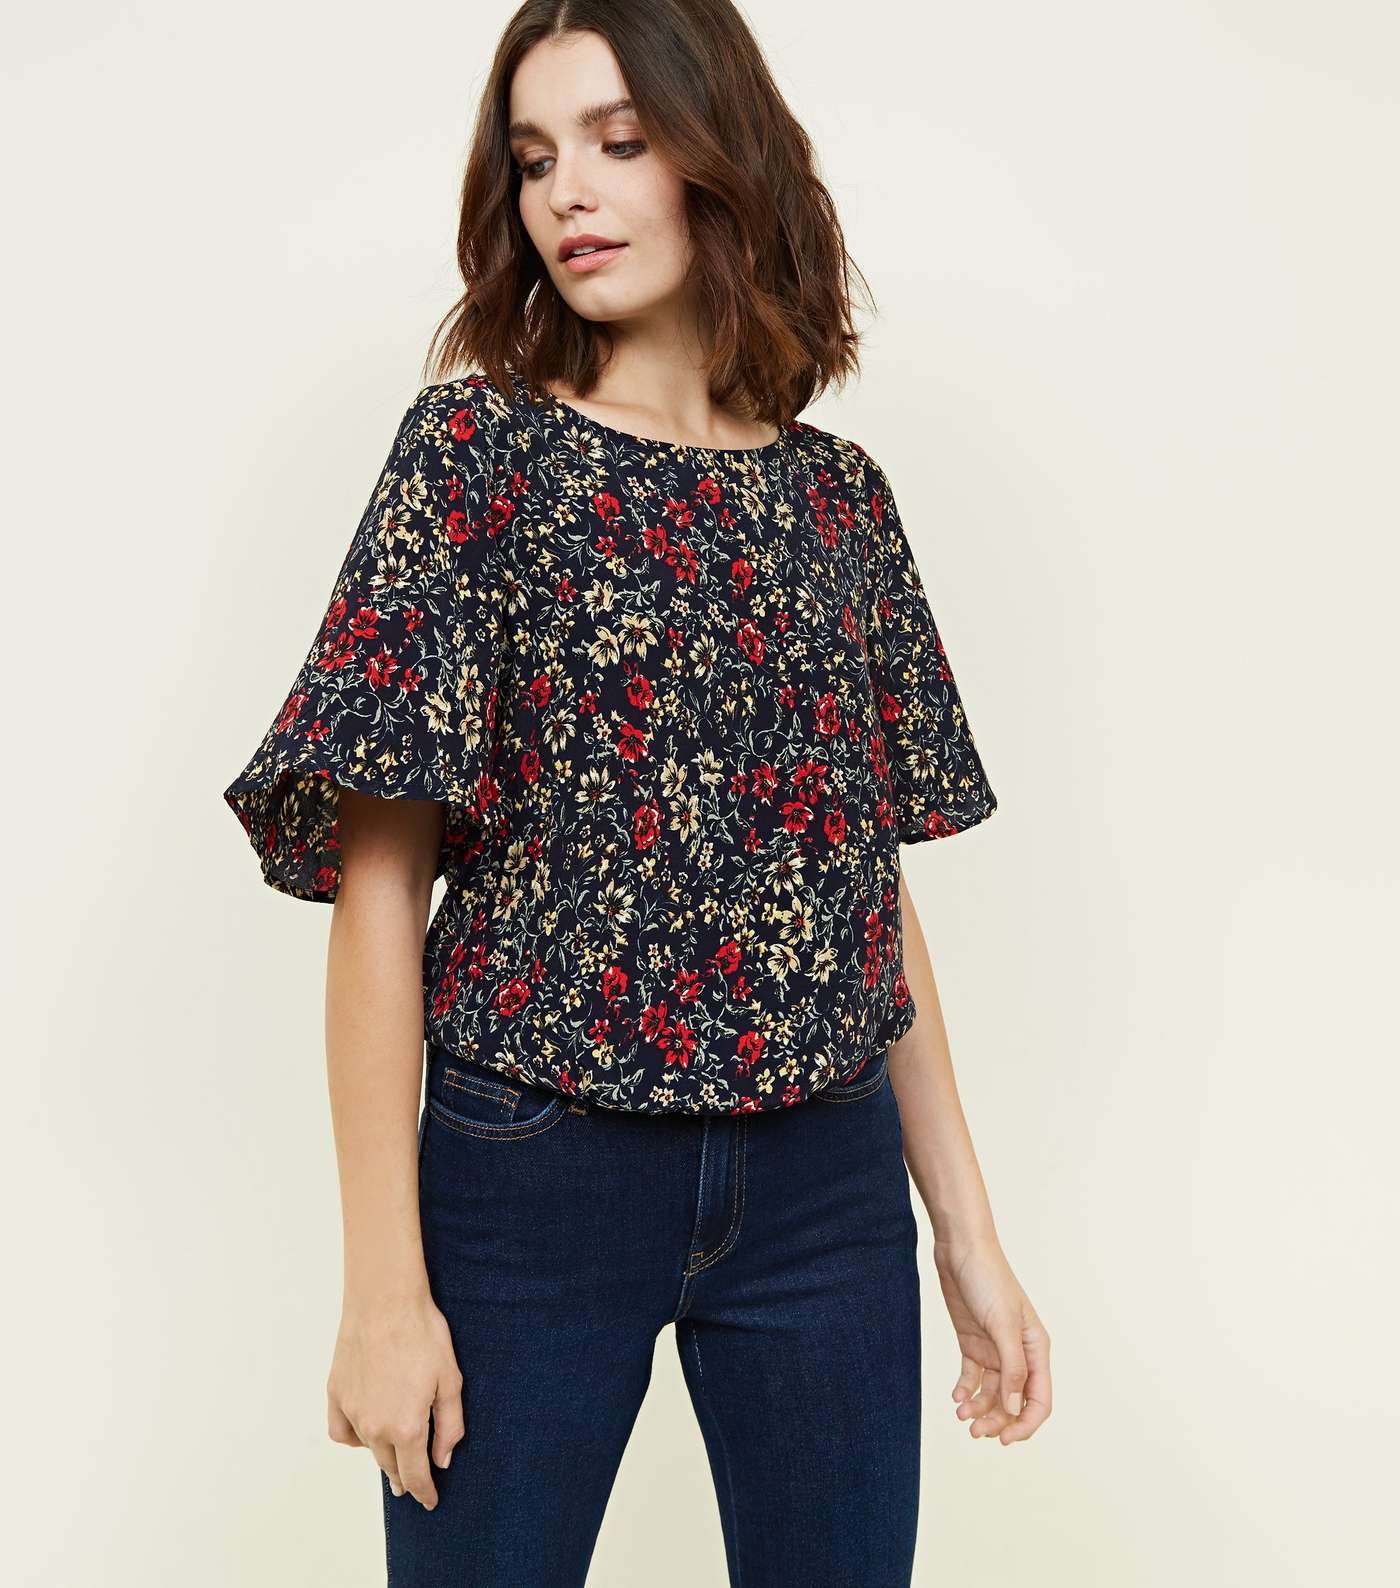 Apricot Navy Floral Tie Back Top